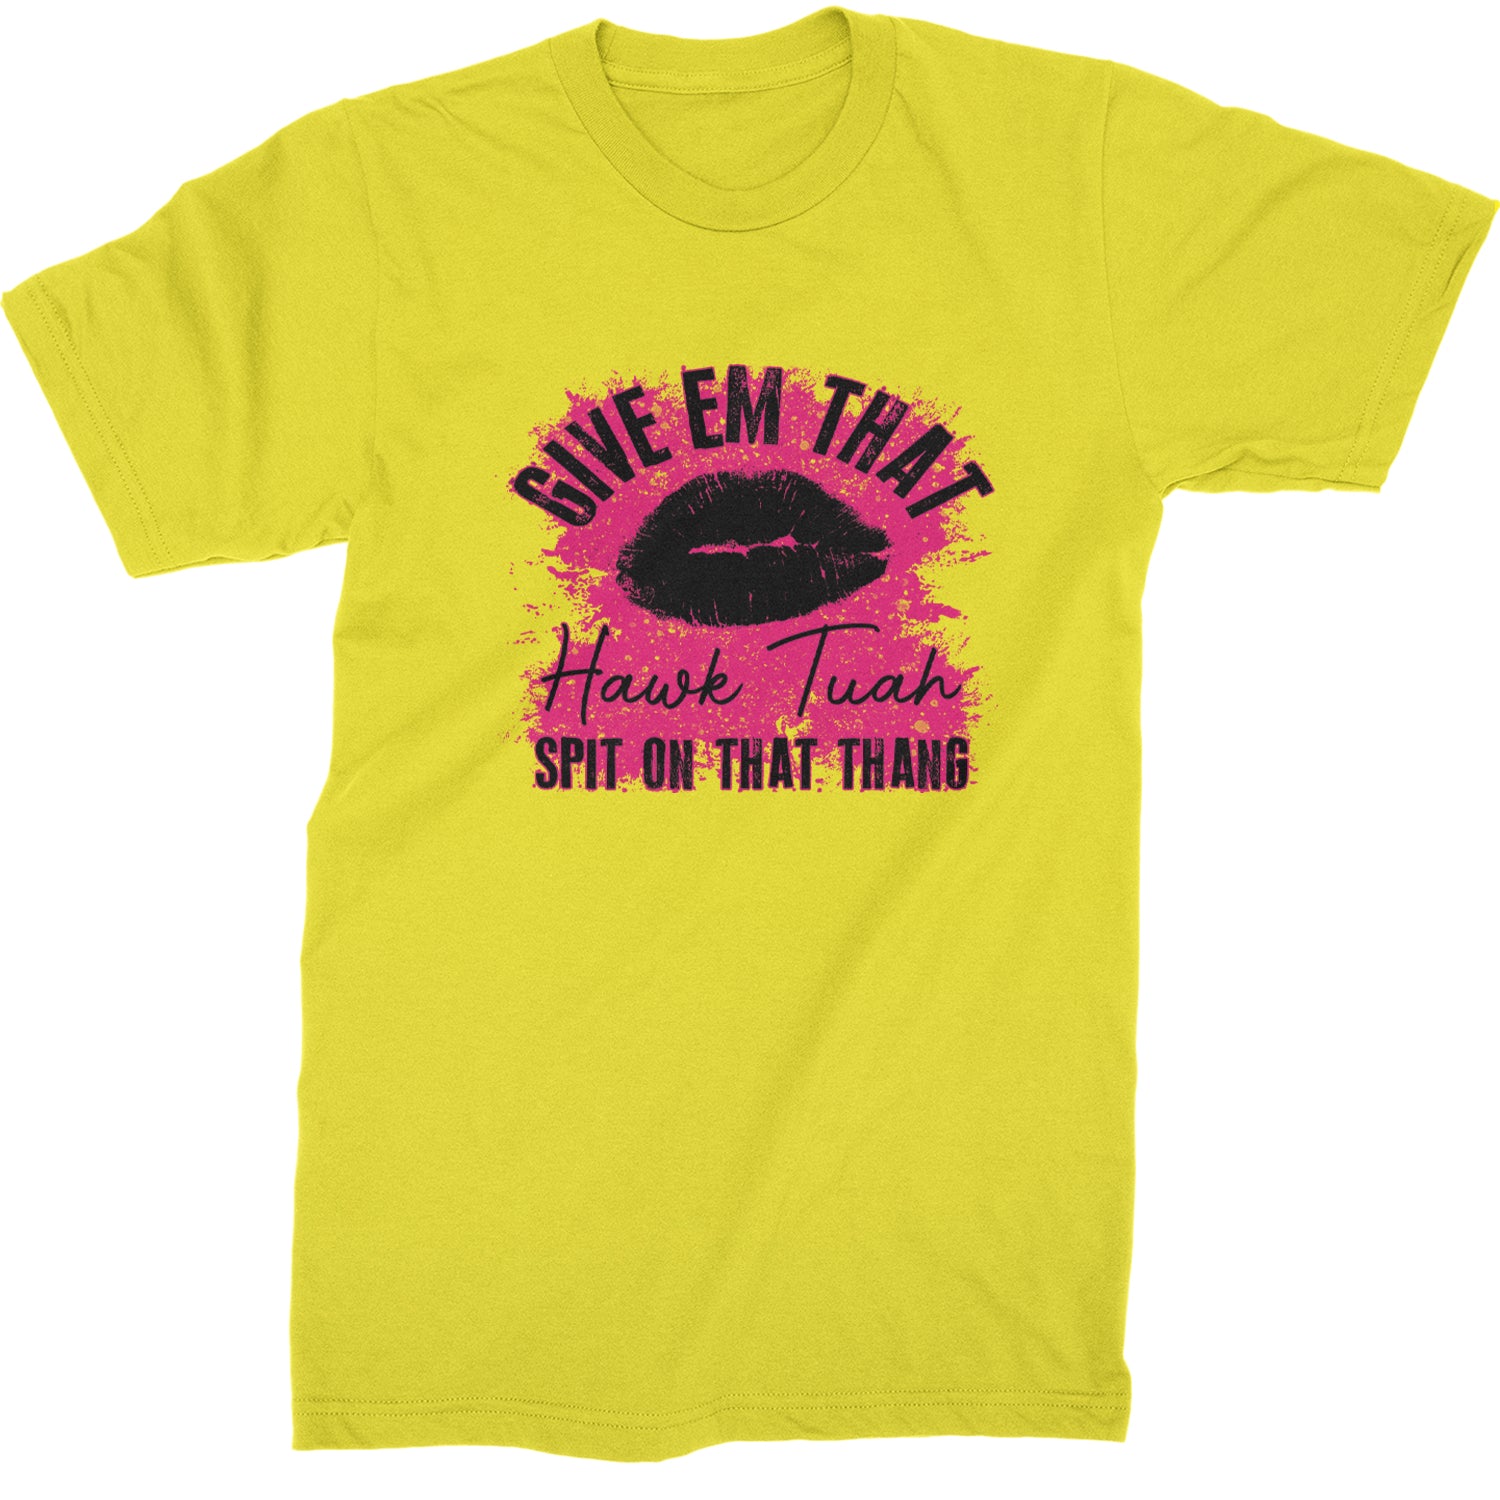 Give 'Em Hawk Tuah Spit On That Thang Mens T-shirt Yellow